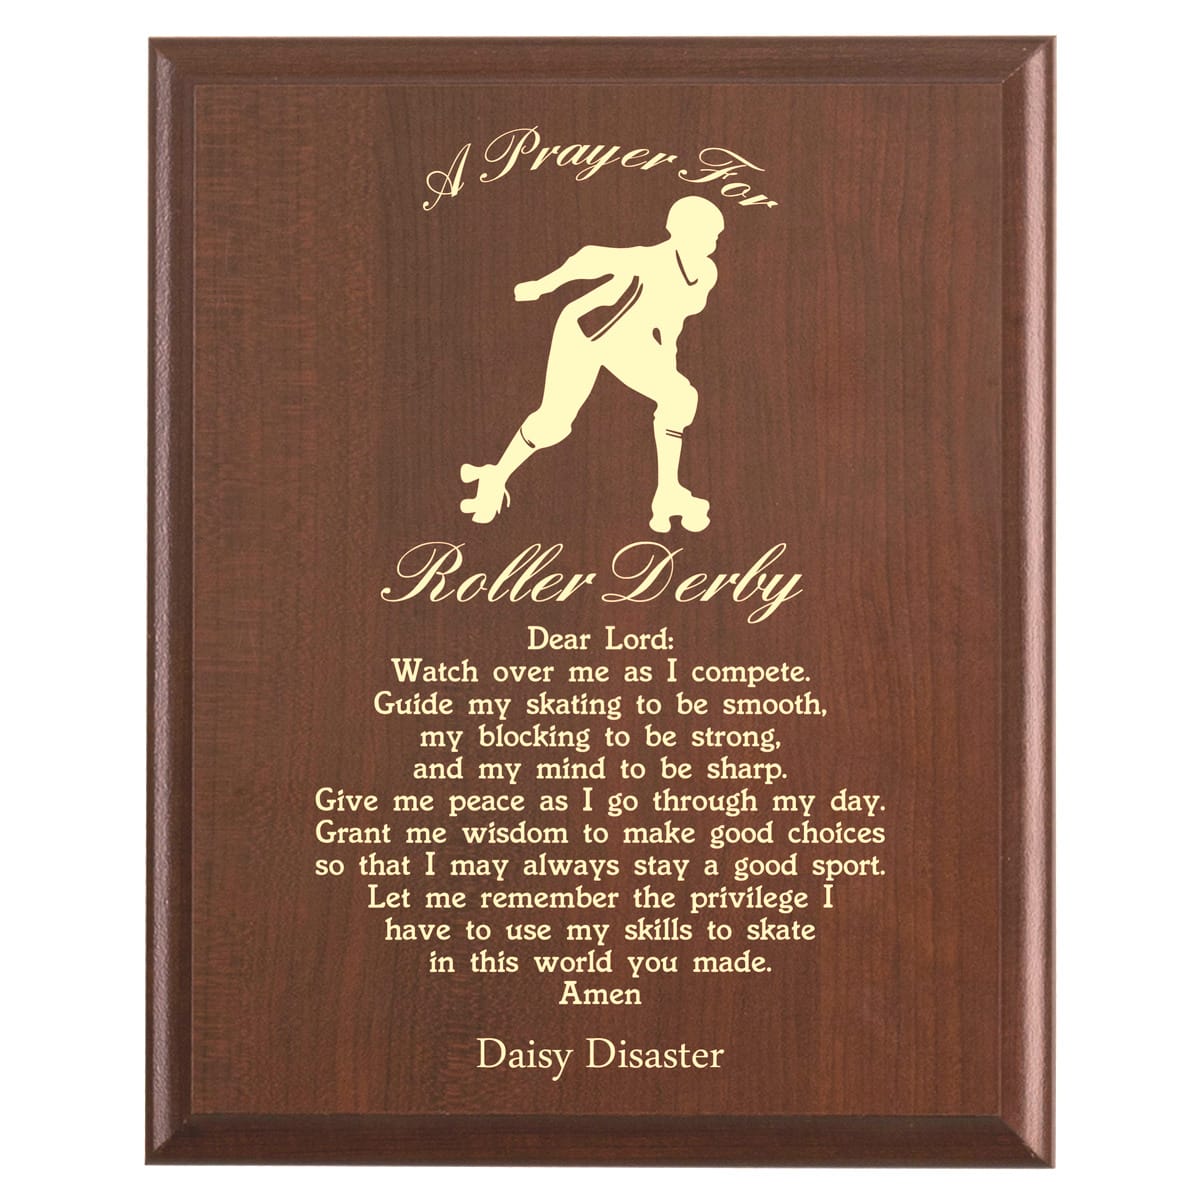 Plaque photo: Roller Derby Prayer Plaque design with free personalization. Wood style finish with customized text.